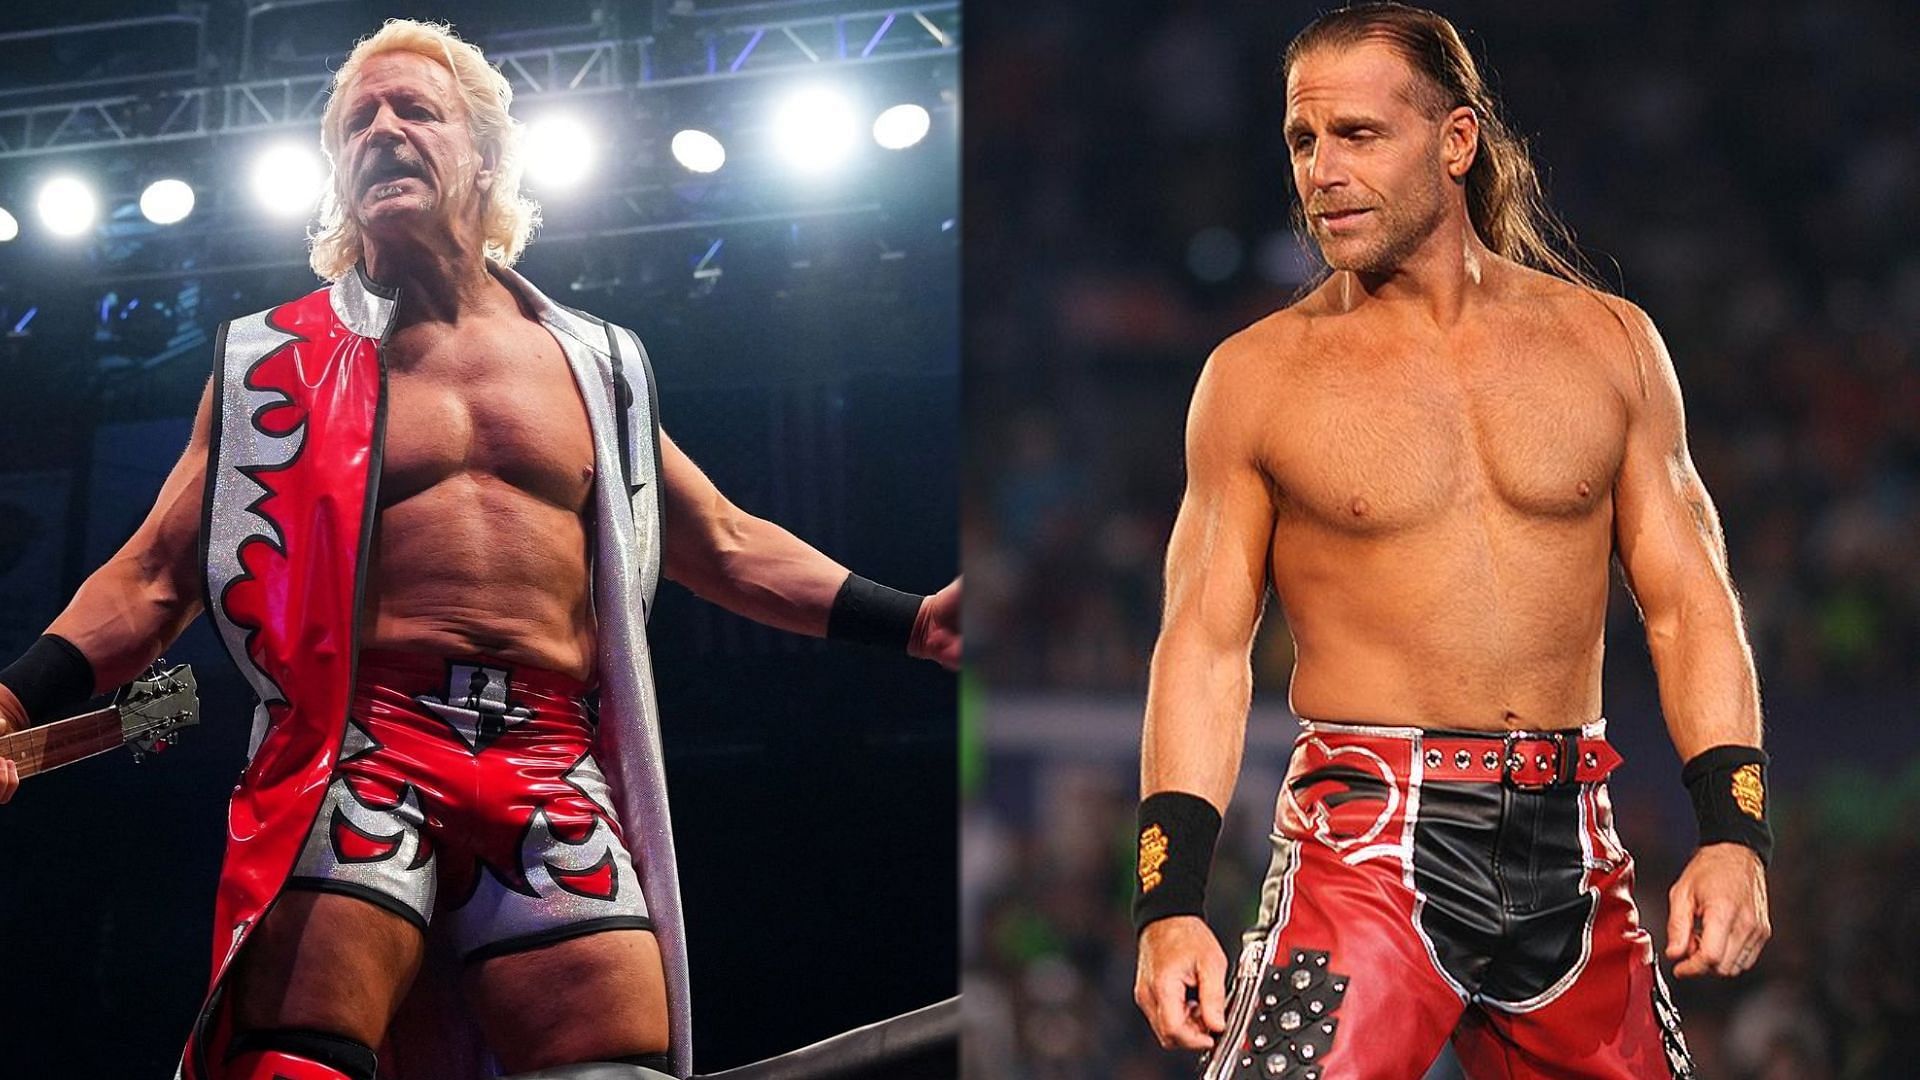 In which way could Double J be better than The Heartbreak Kid?